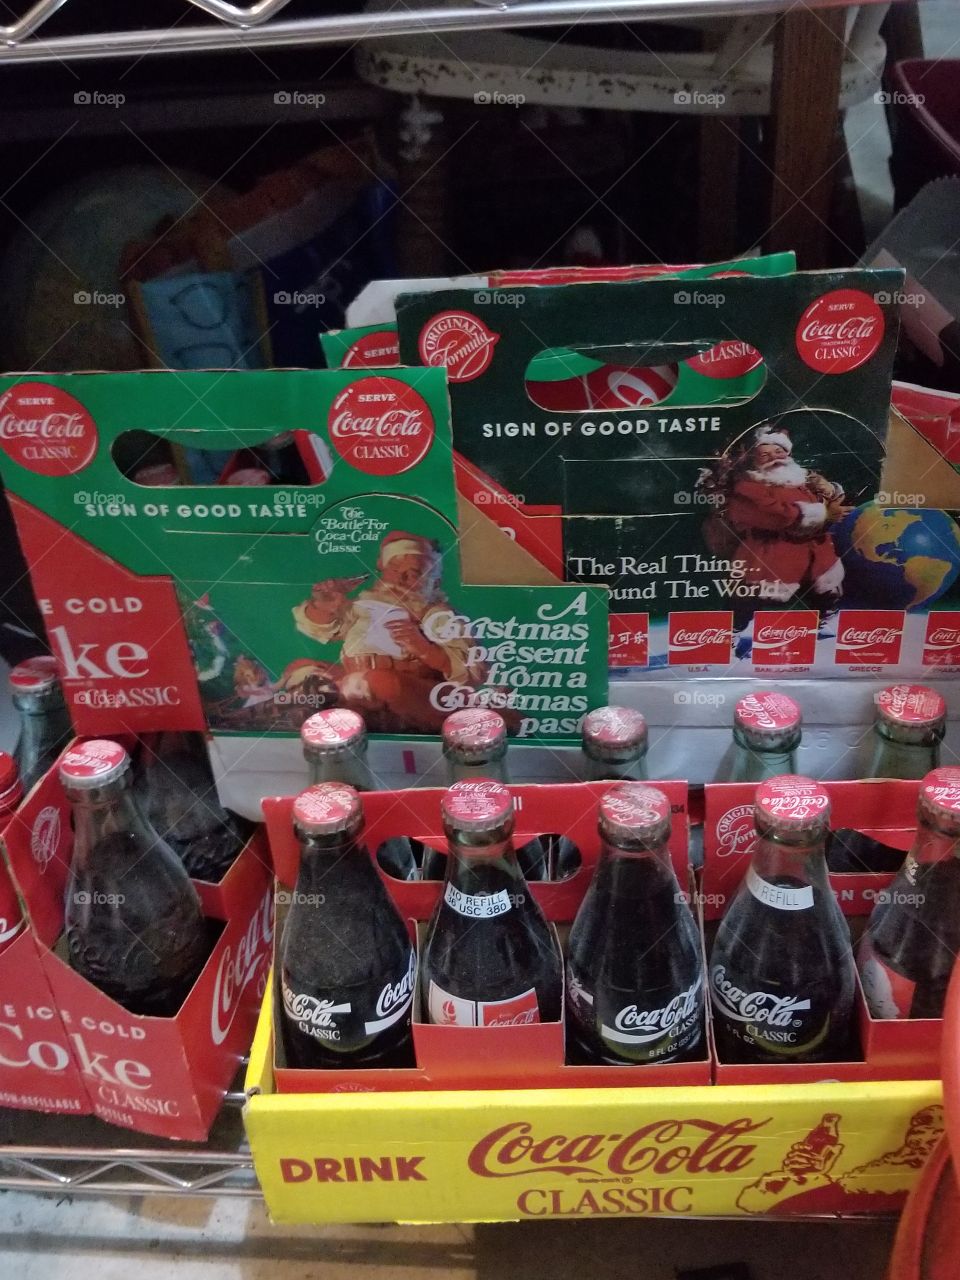 A collection of sealed, vintage coke bottles with Christmas six pack boxes.